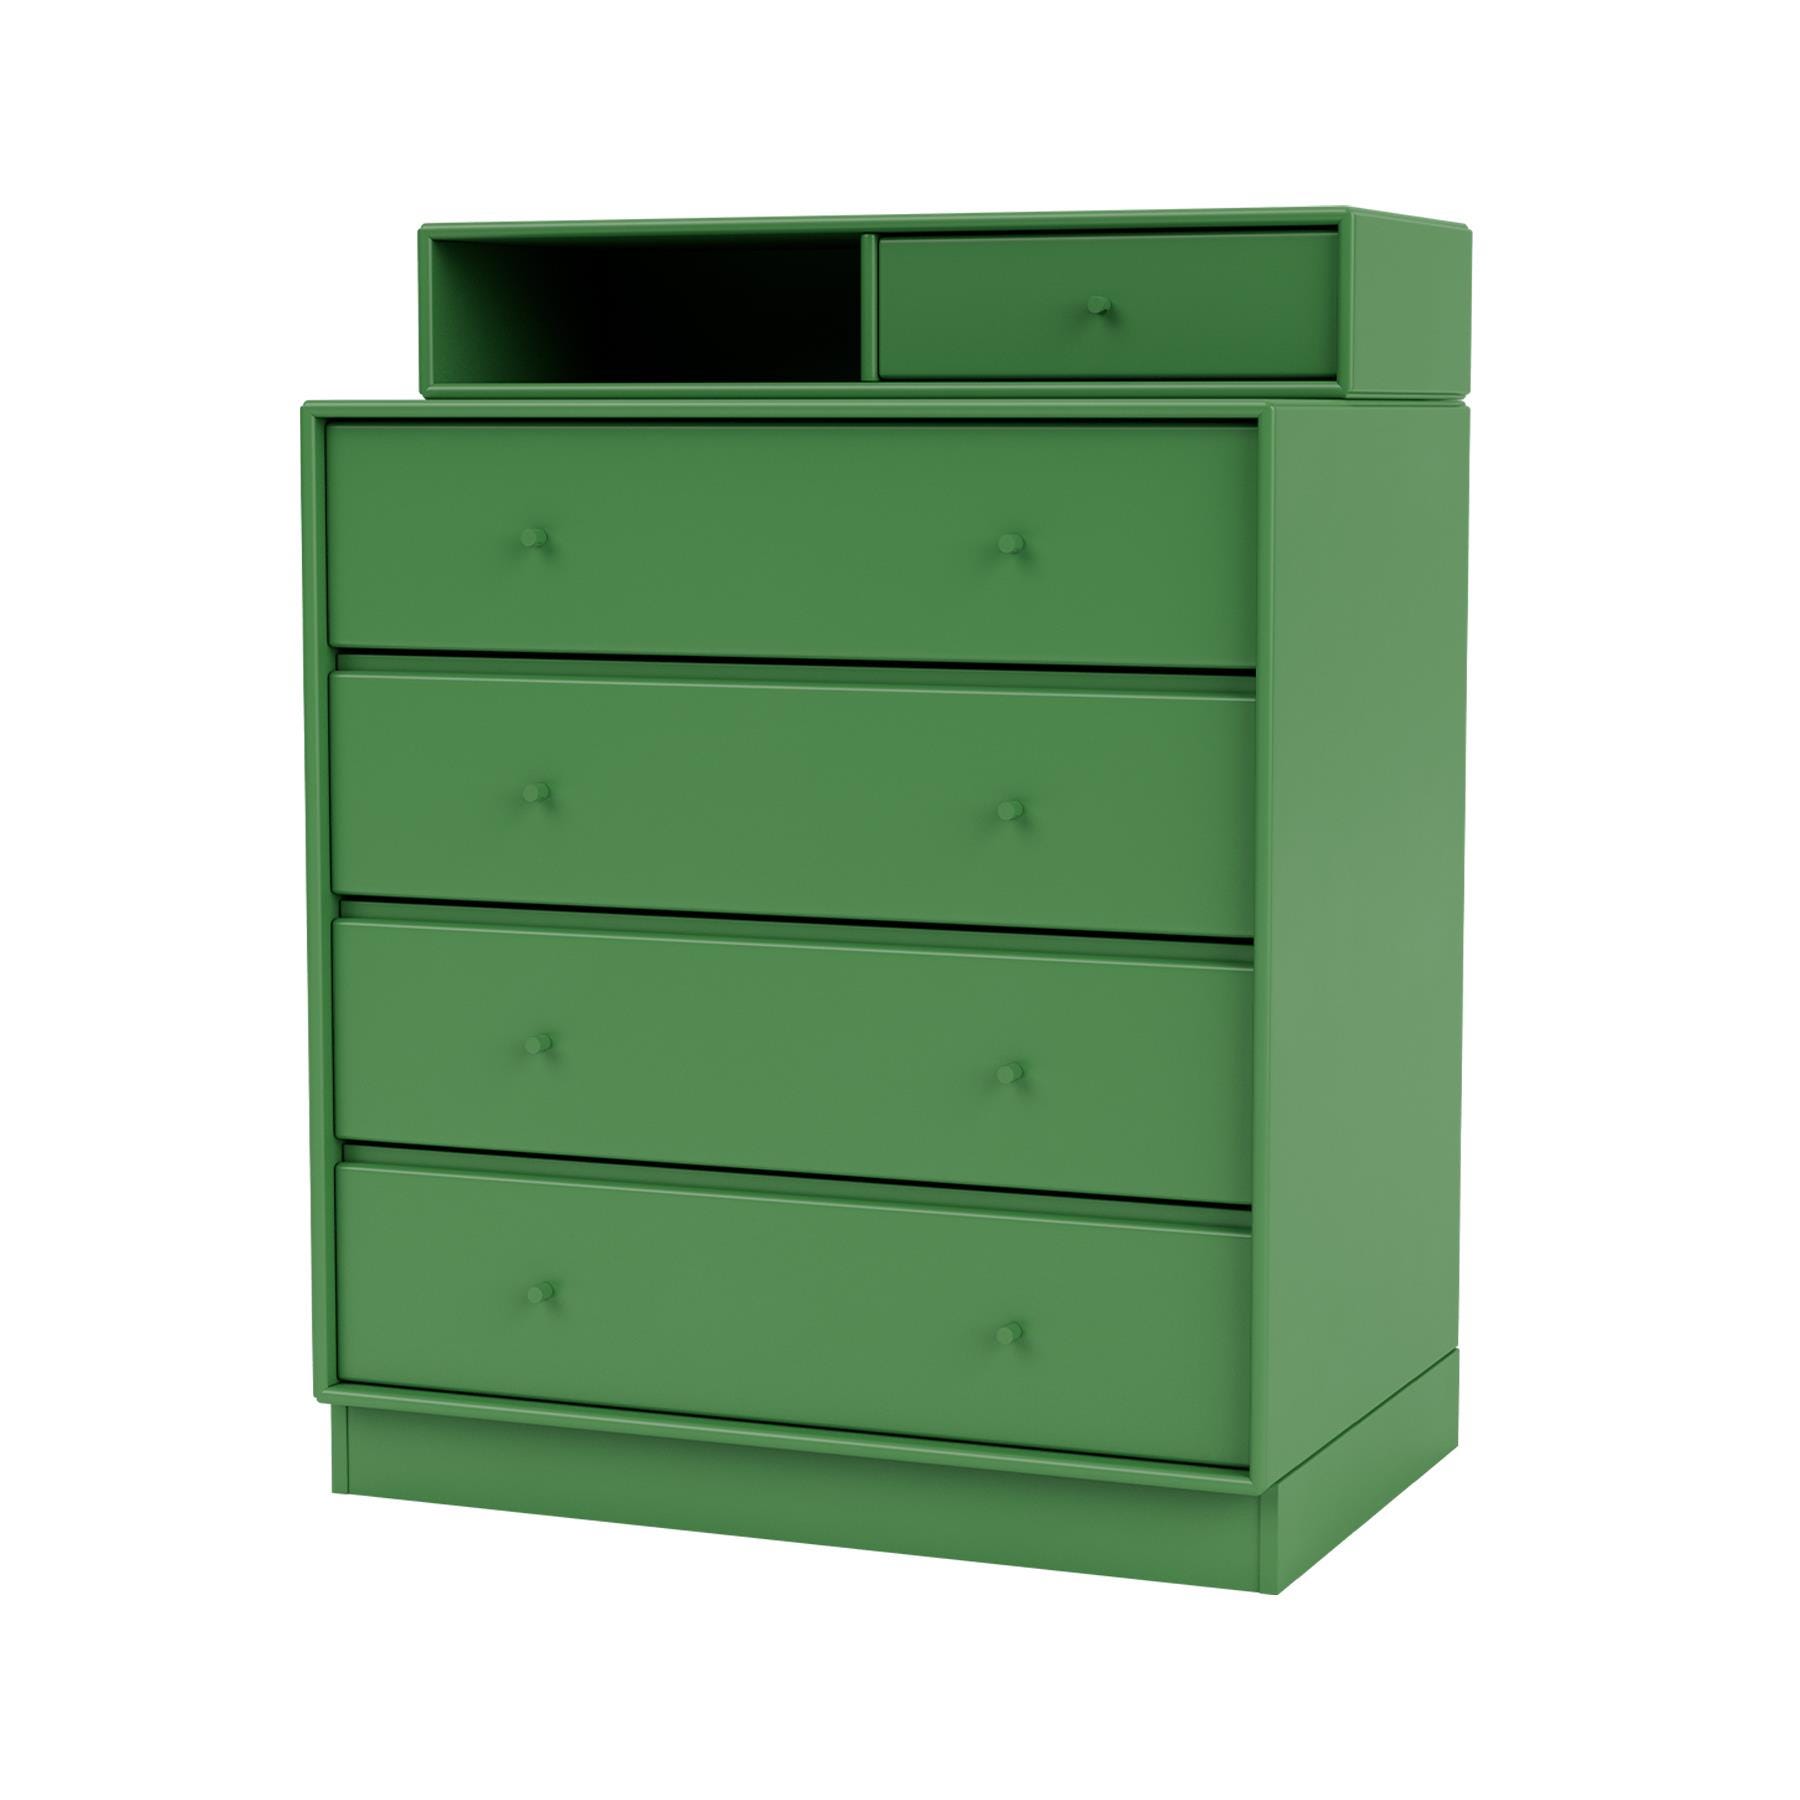 Montana Keep Chest Of Drawers Parsley Plinth Green Designer Furniture From Holloways Of Ludlow